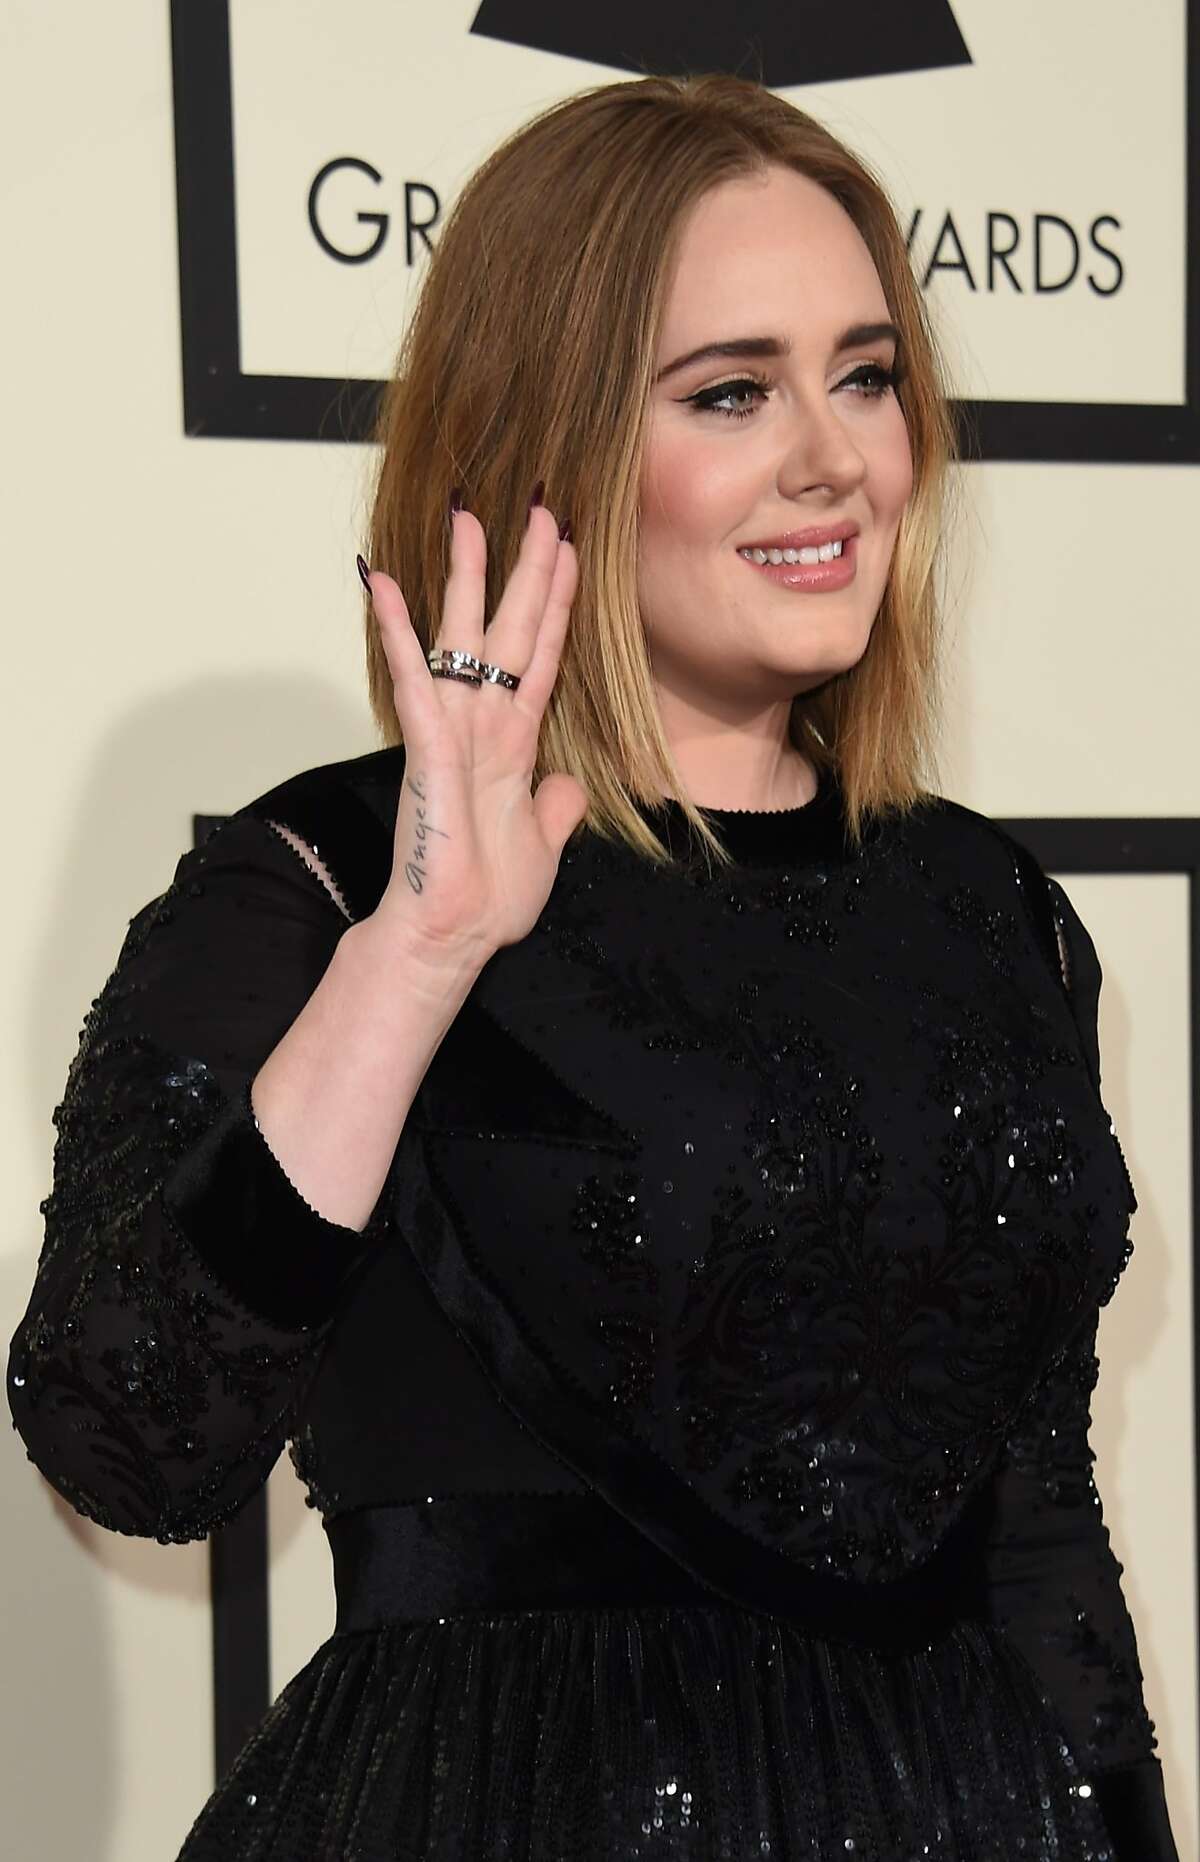 Grammys 2016: Here's Why Adele's Performance Was 'Out of Tune